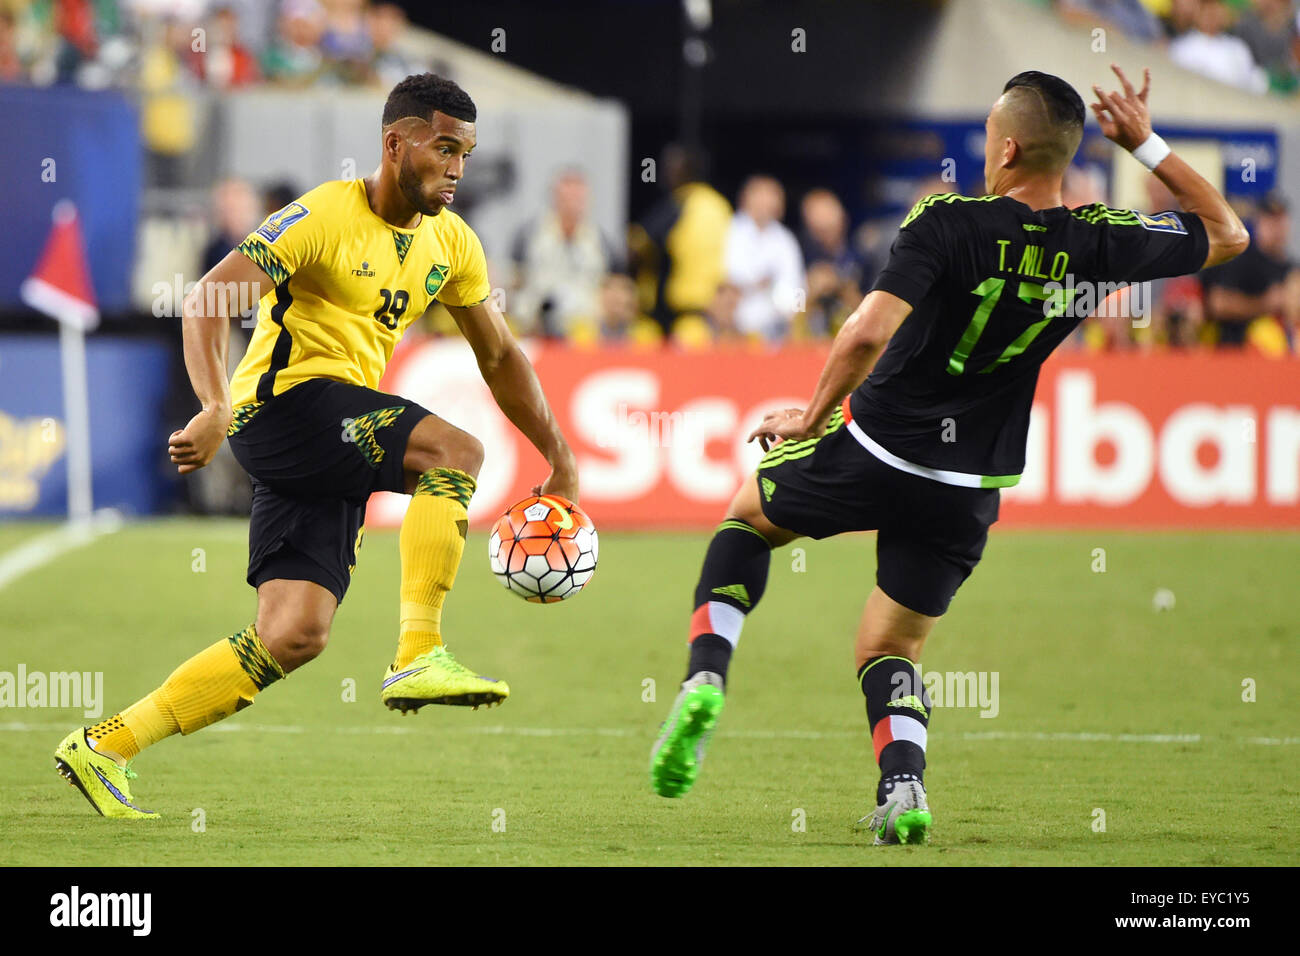 Philadelphia, Pennsylvania, USA. 26th July, 2015. Jamaica defender Adrian Mariappa #19 controls the ball around the defense of Mexico midfielder Jorge Torres Nilo #17 during the 2015 CONCACAF Gold Cup final between Jamaica and Mexico at Lincoln Financial Field in Philadelphia, Pennsylvania. Mexico defeated Jamaica 3-1. Rich Barnes/CSM/Alamy Live News Stock Photo